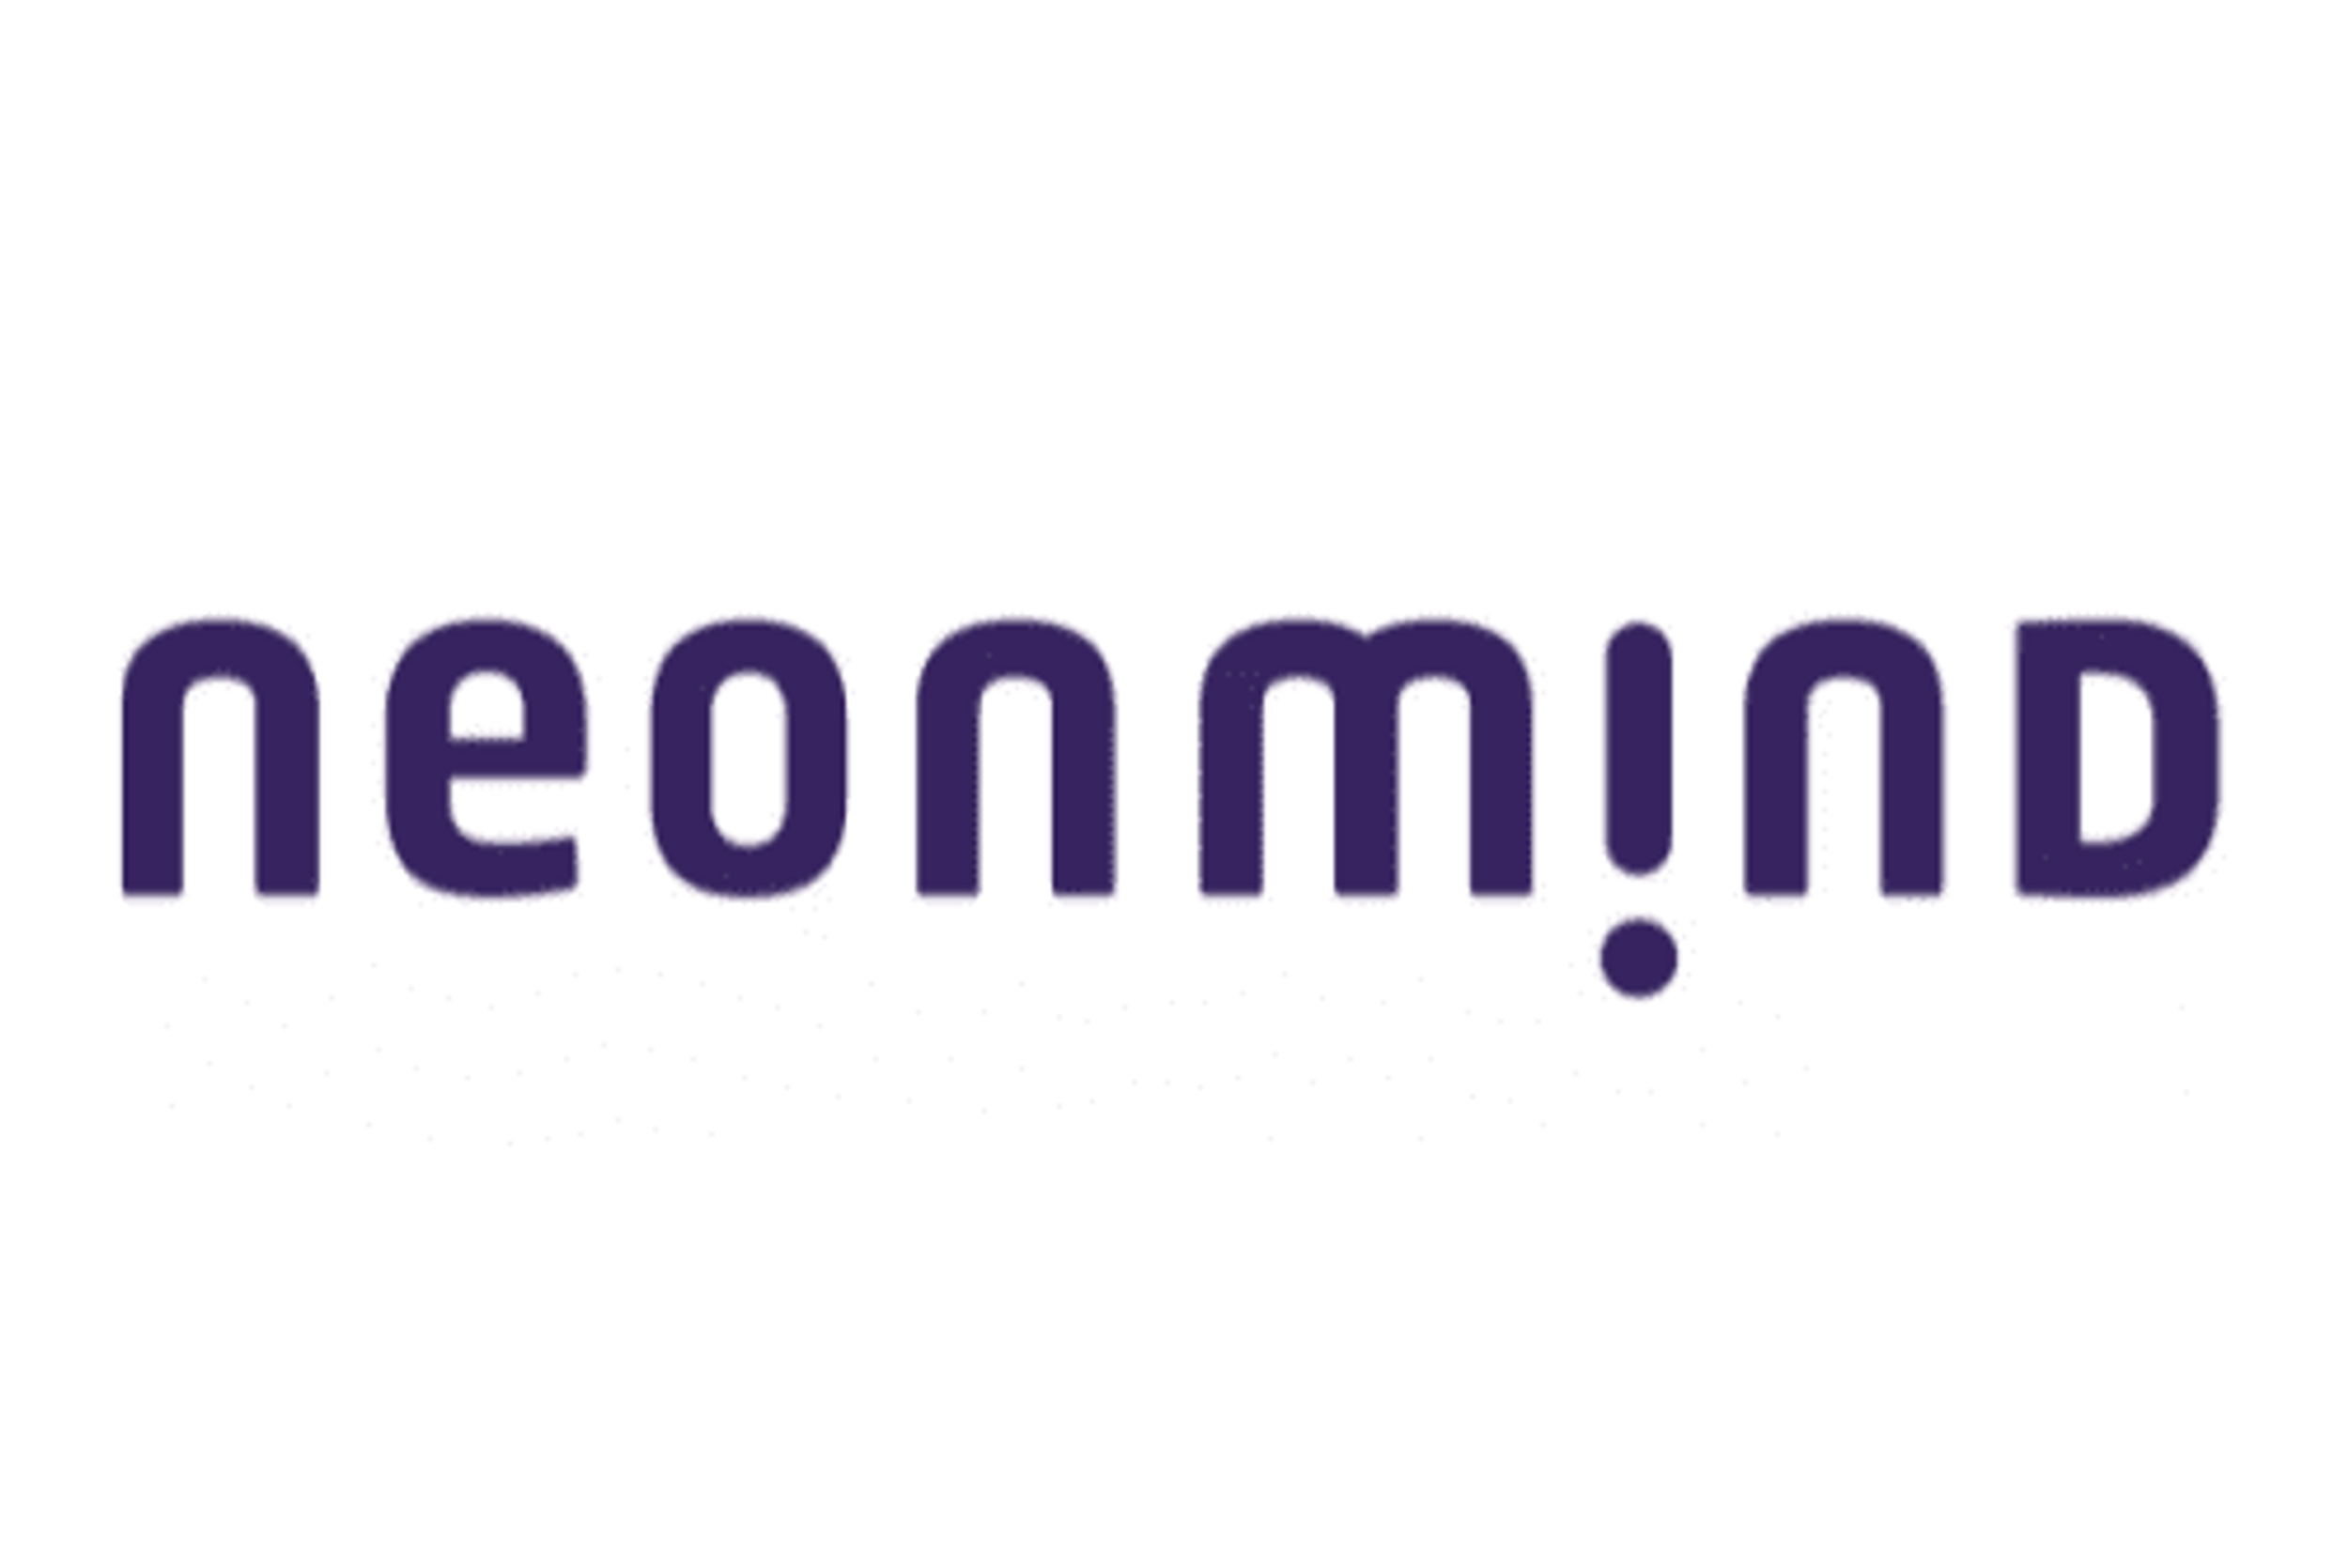 NeonMind Files New Provisional Patent Application Covering Novel Mechanism of Weight Loss